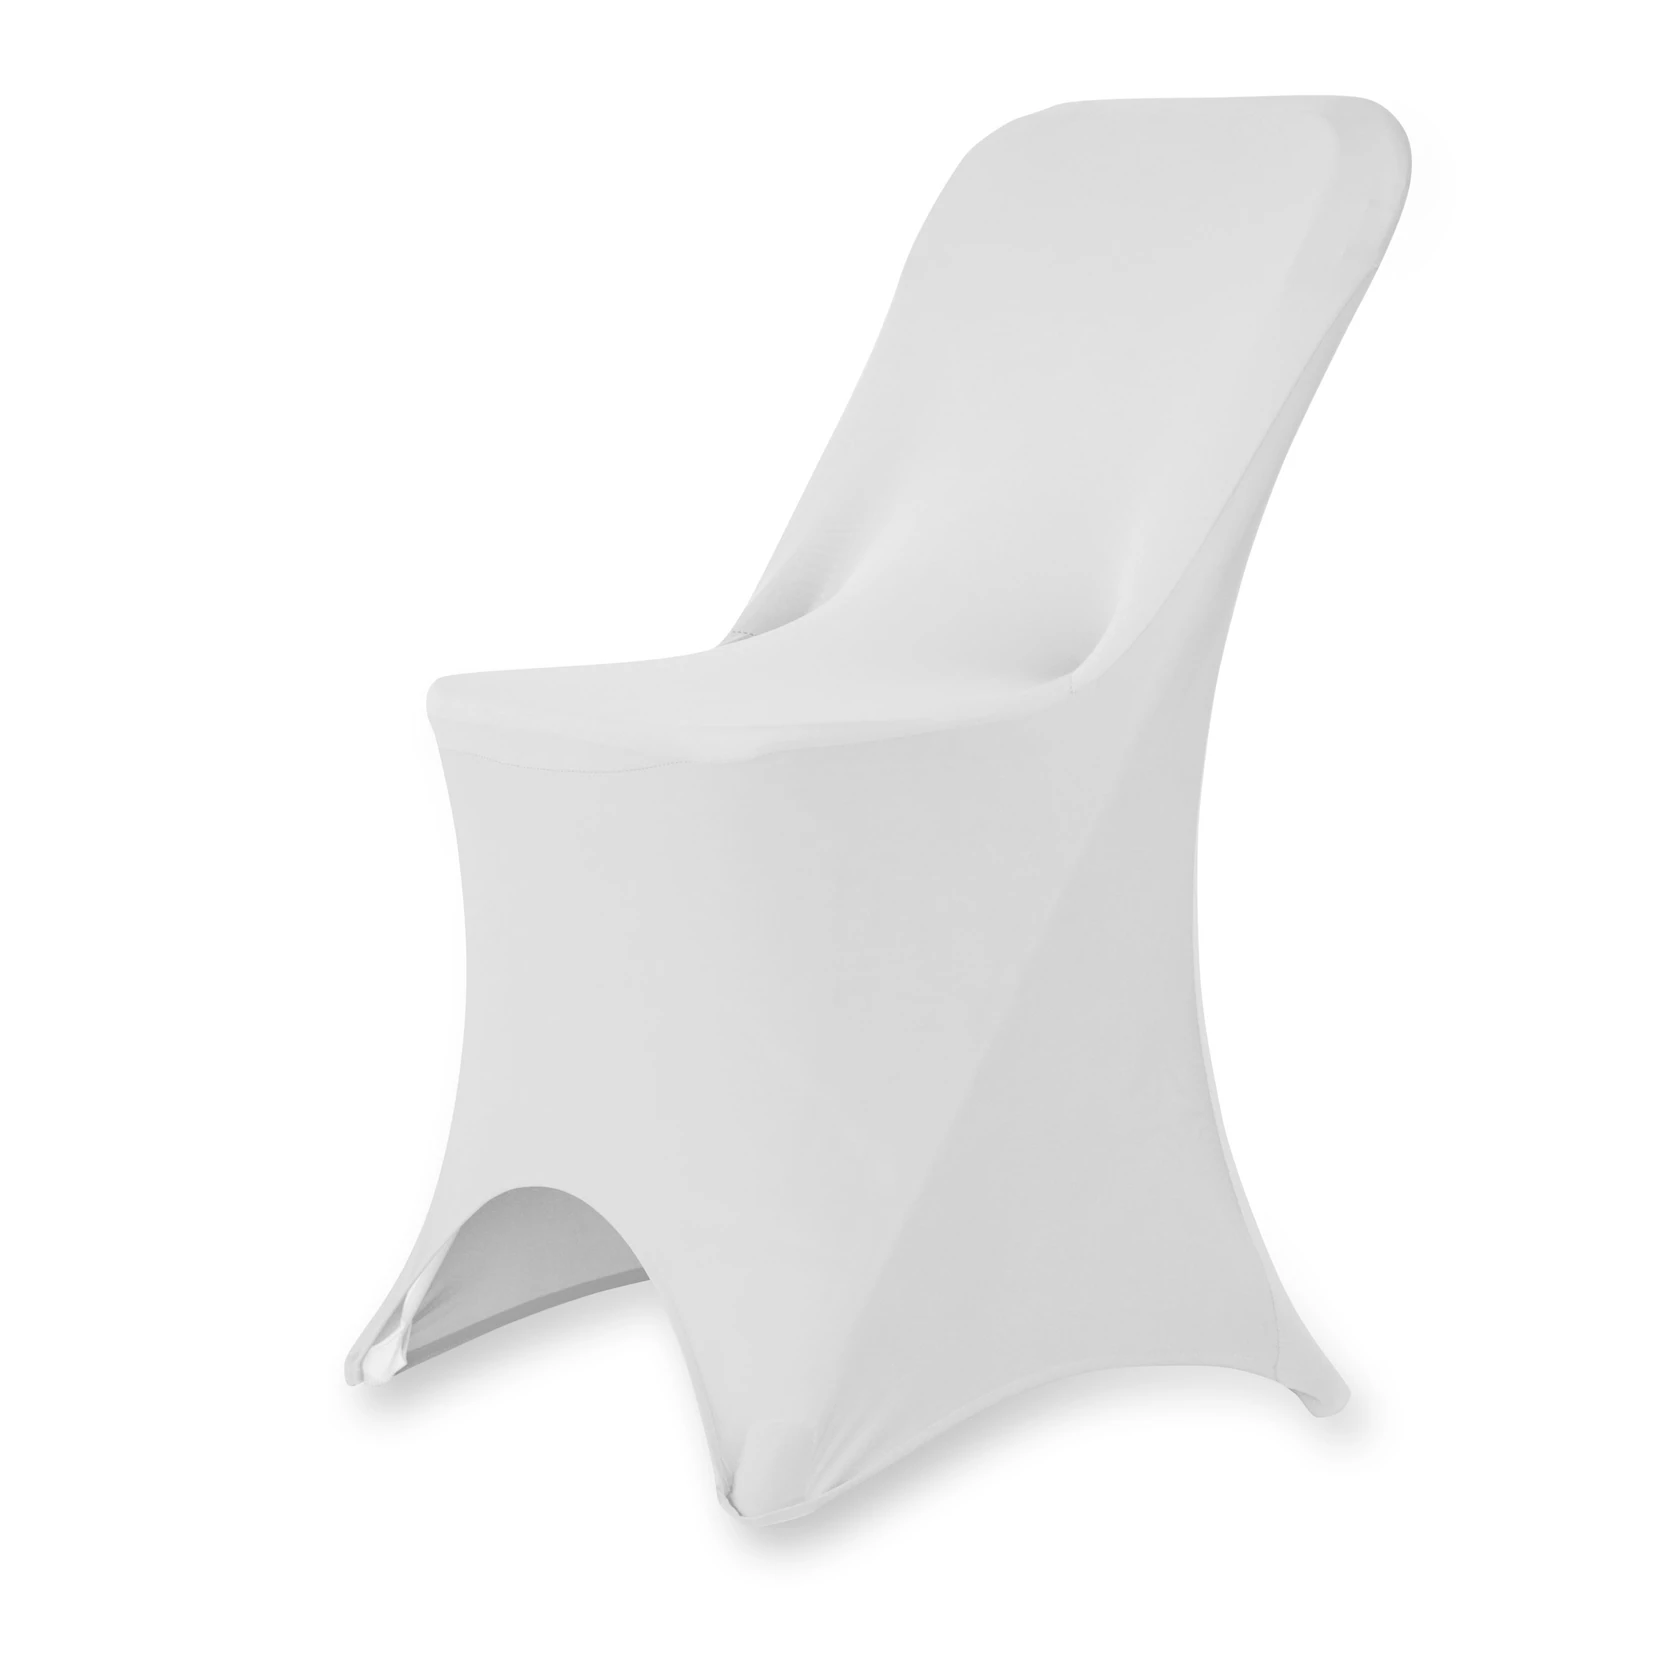 Baby Blue Spandex Stretch Banquet Chair Covers Sale